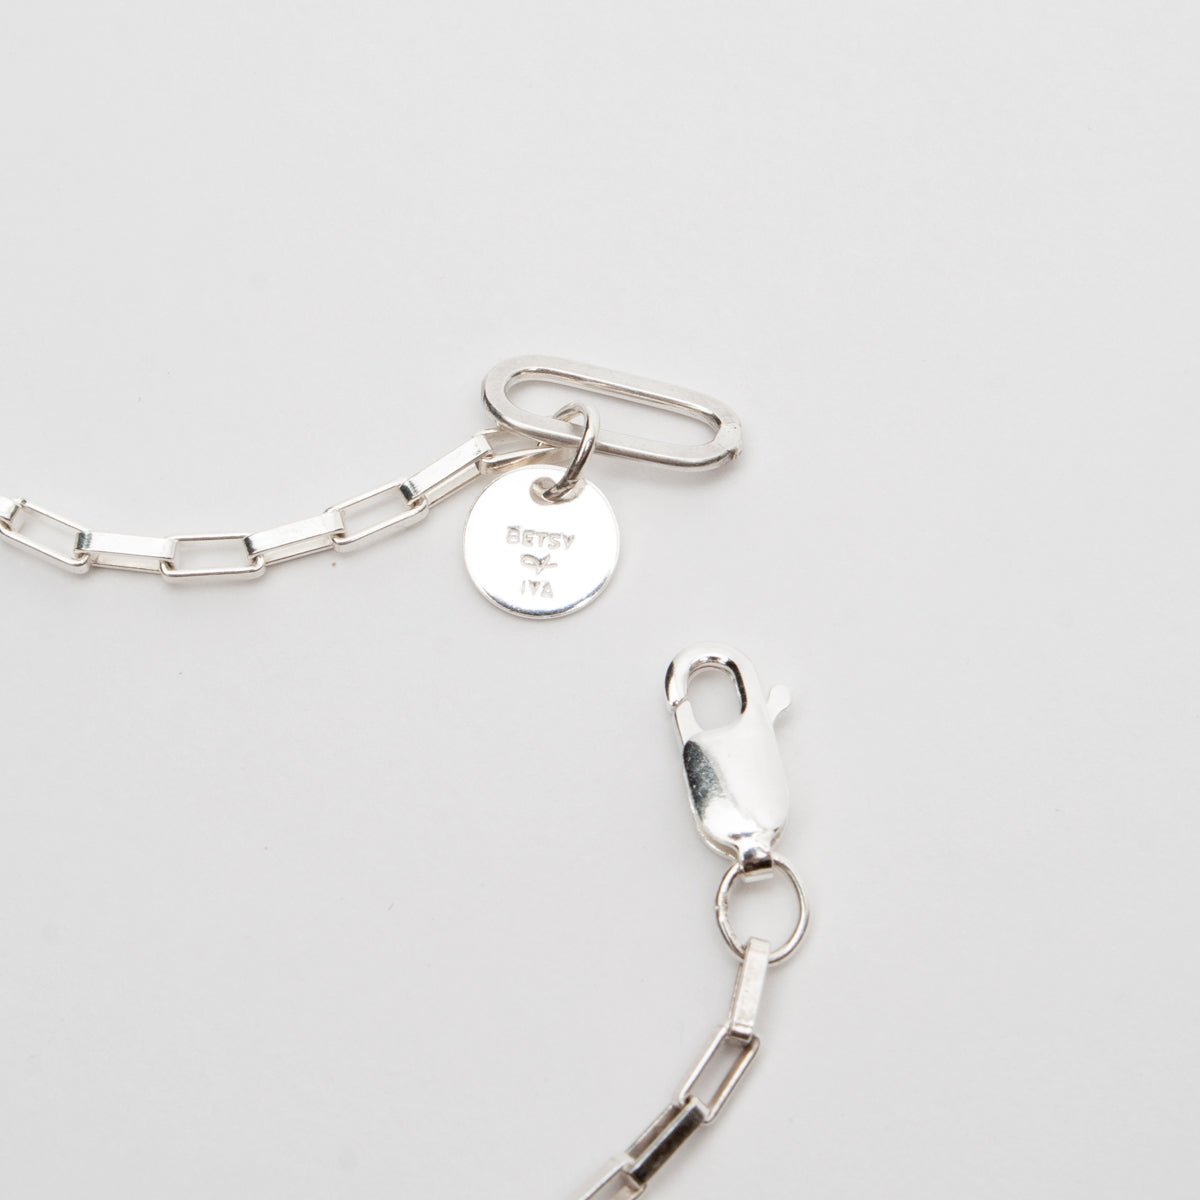 Photo shows a sterling silver lobster claw clasp at the end of a small link chain necklace. The clasp portion of the necklace features a Betsy & Iya tag. Designed and handcrafted in Portland, Oregon.